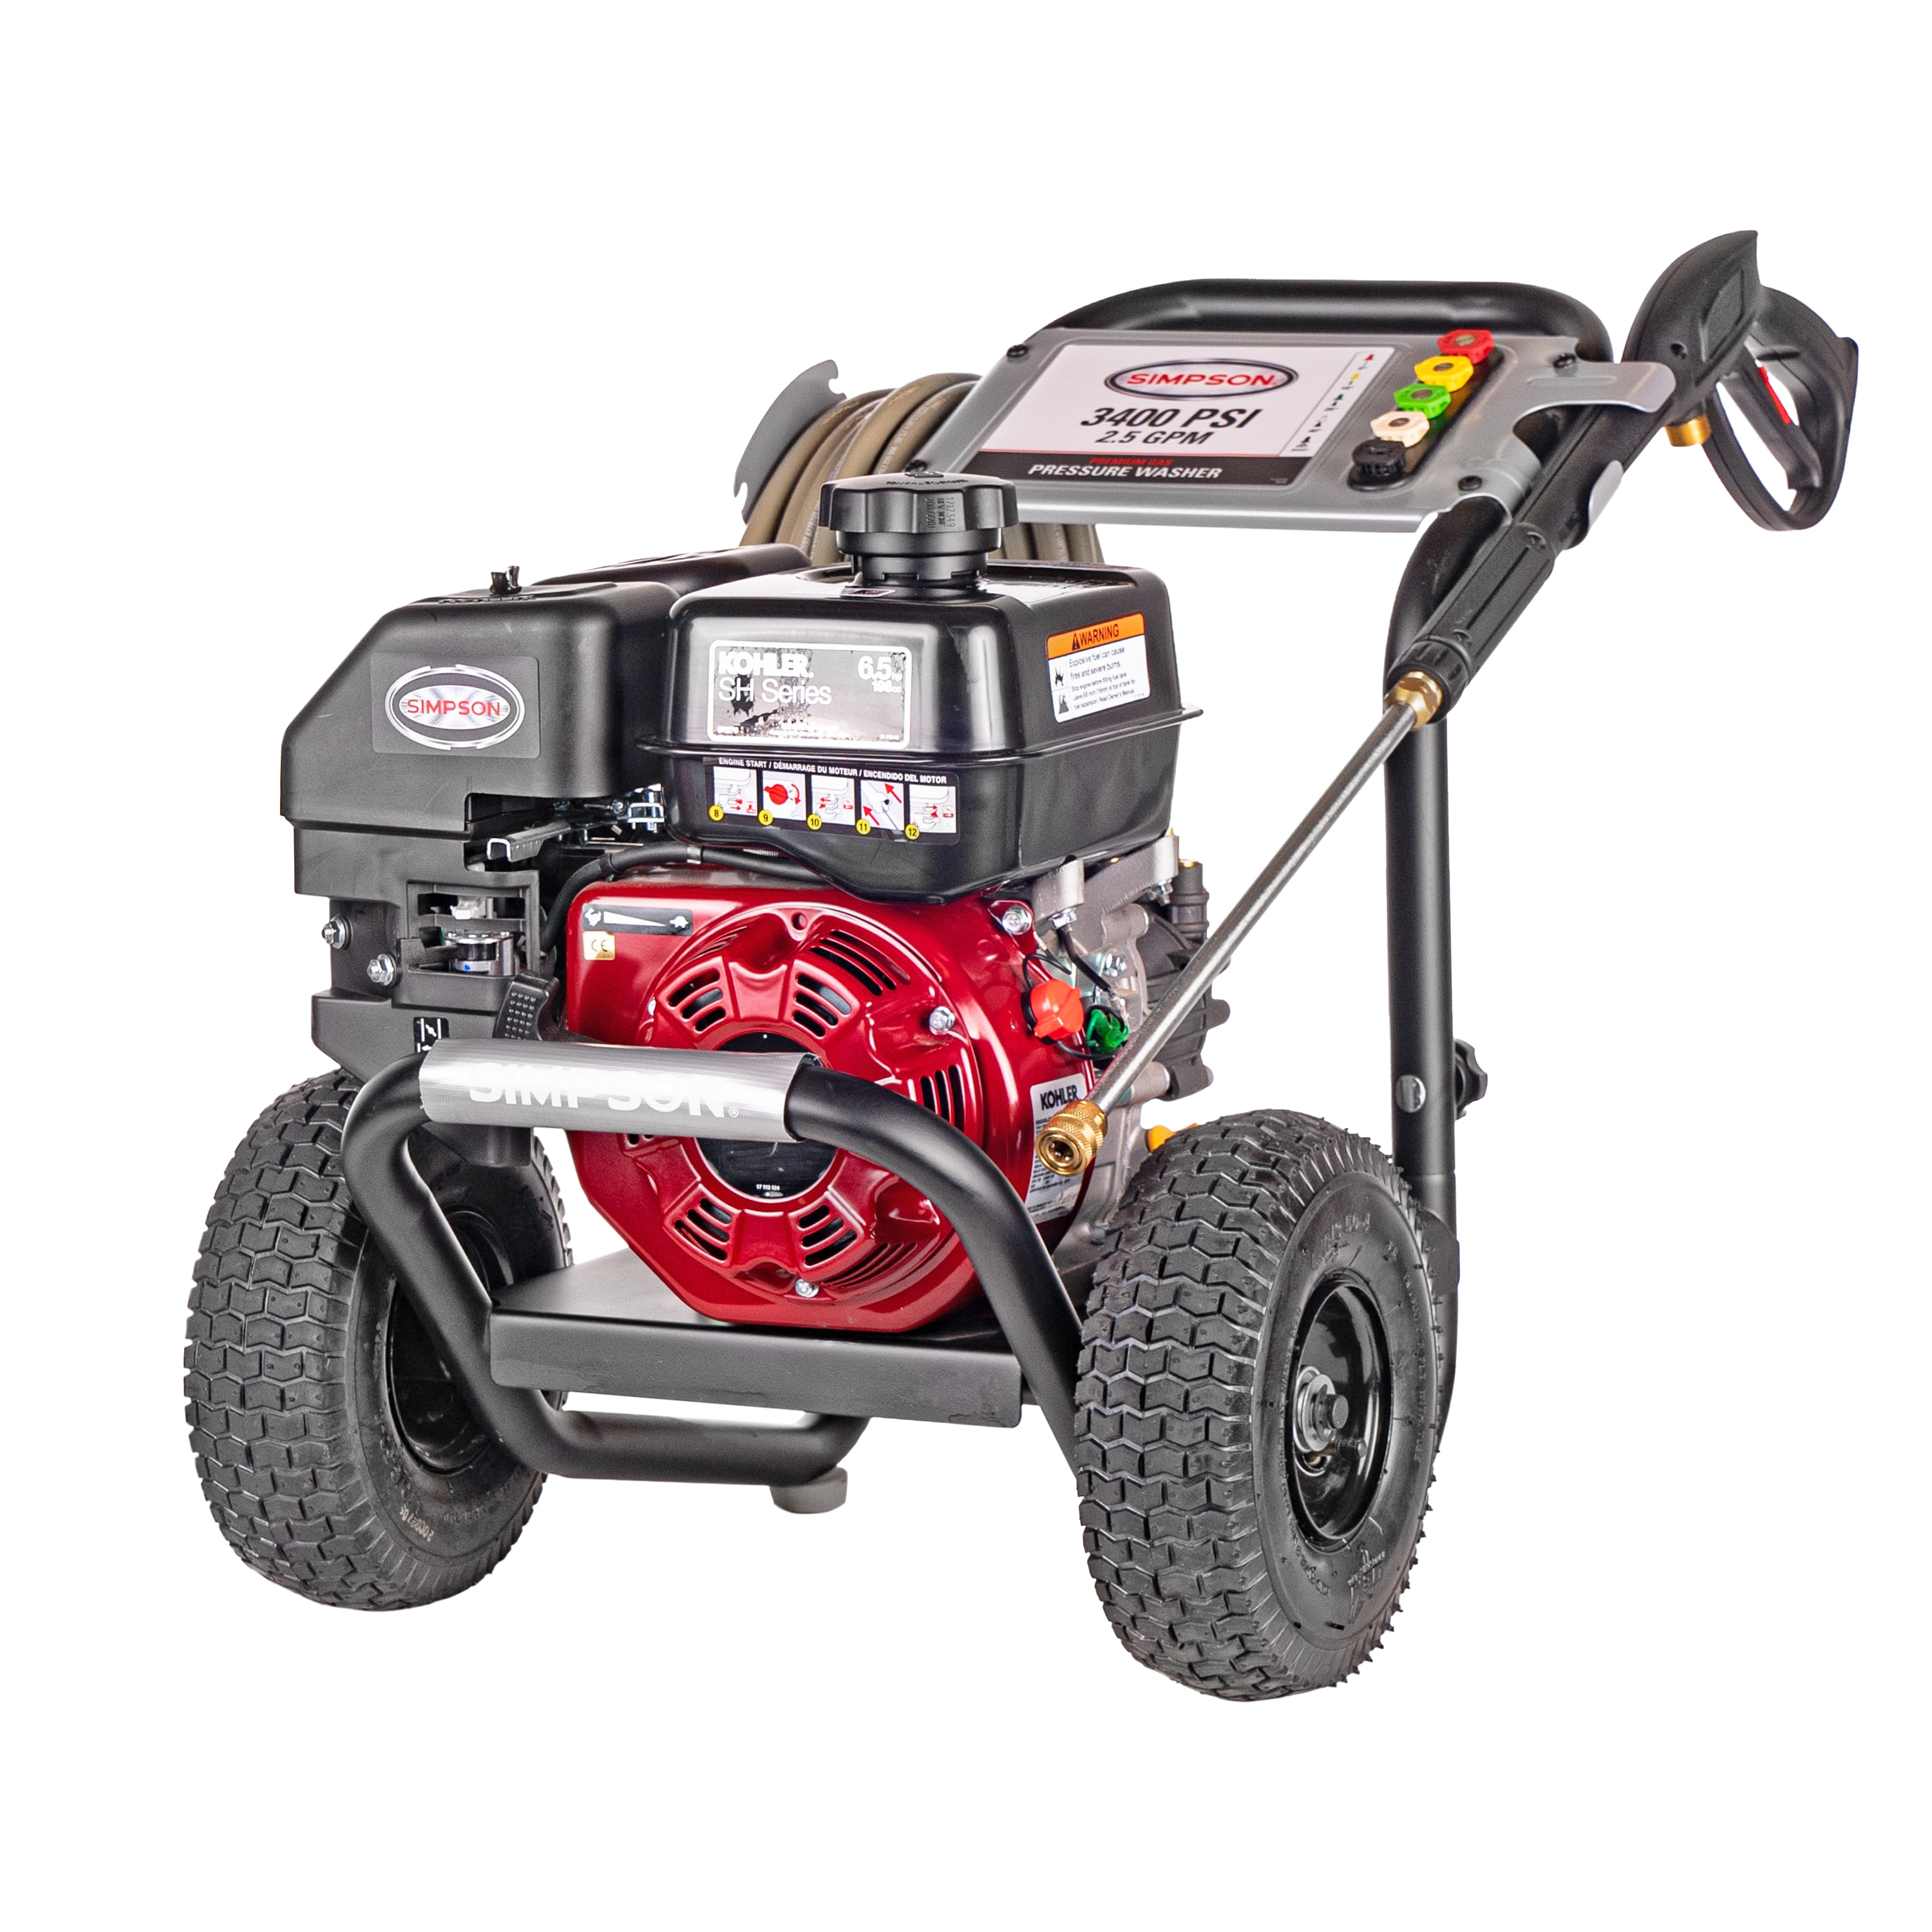 PressuReady® 3400 PSI at 2.5 GPM Powered Cold Water Gas Pressure Washer